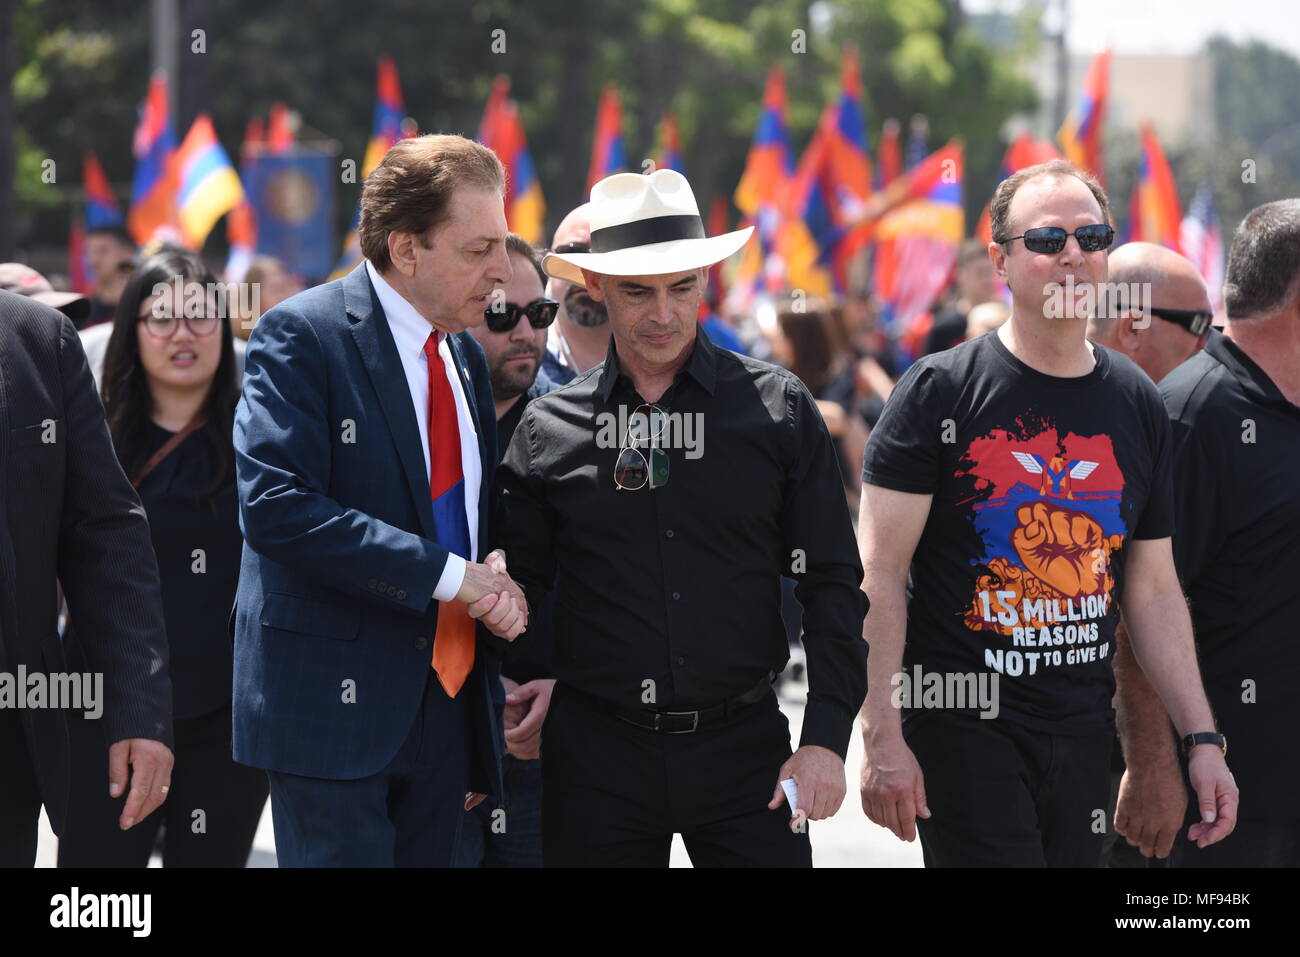 Los Angeles, USA. April 24, 2018 - LOS ANGELES — High-ranking politicians, as well as local, state, and federal government officials as U.S. Rep. Adam Schiff (D-Burbank) marching to commemorate the 103rd anniversary commemoration of the Armenian Genocide on April 24 in Little Armenia, Los Angeles, CA. Credit: Hayk Shalunts/Alamy Live News Stock Photo